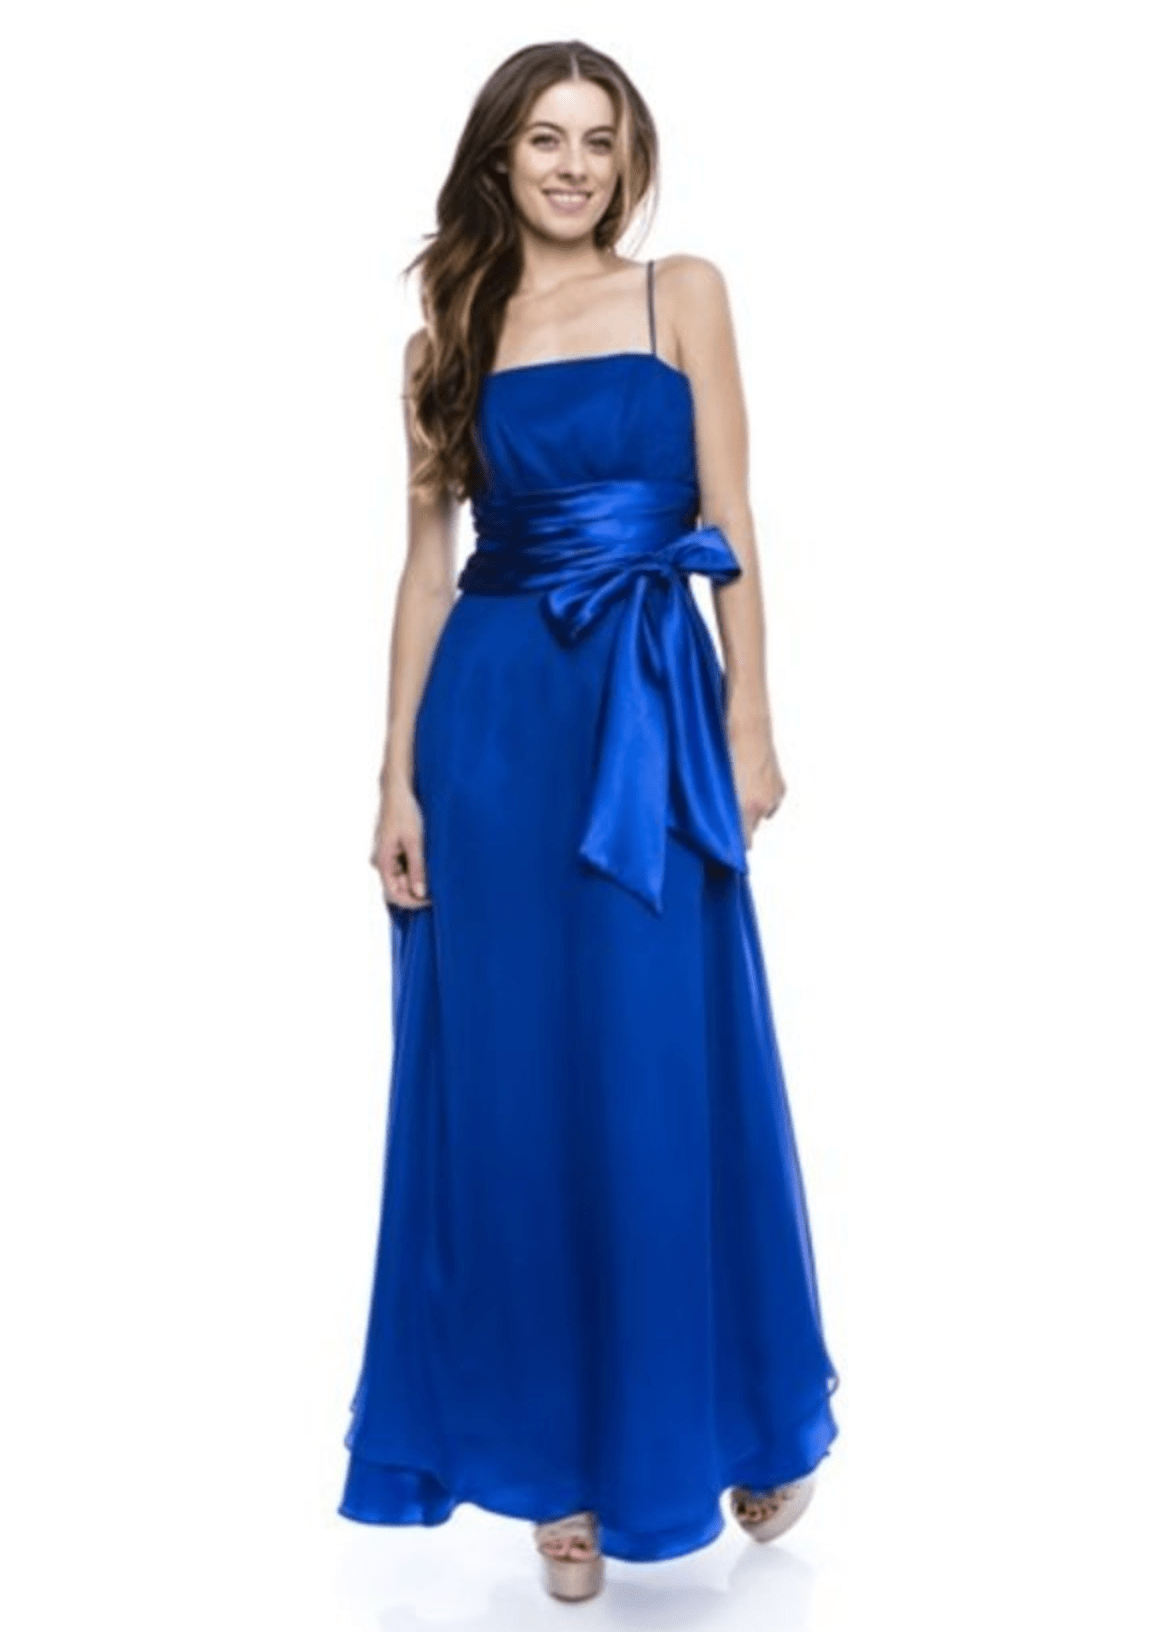 Long Chiffon Dress by Chicas | 19 Colors Collection 2 - NORMA REED